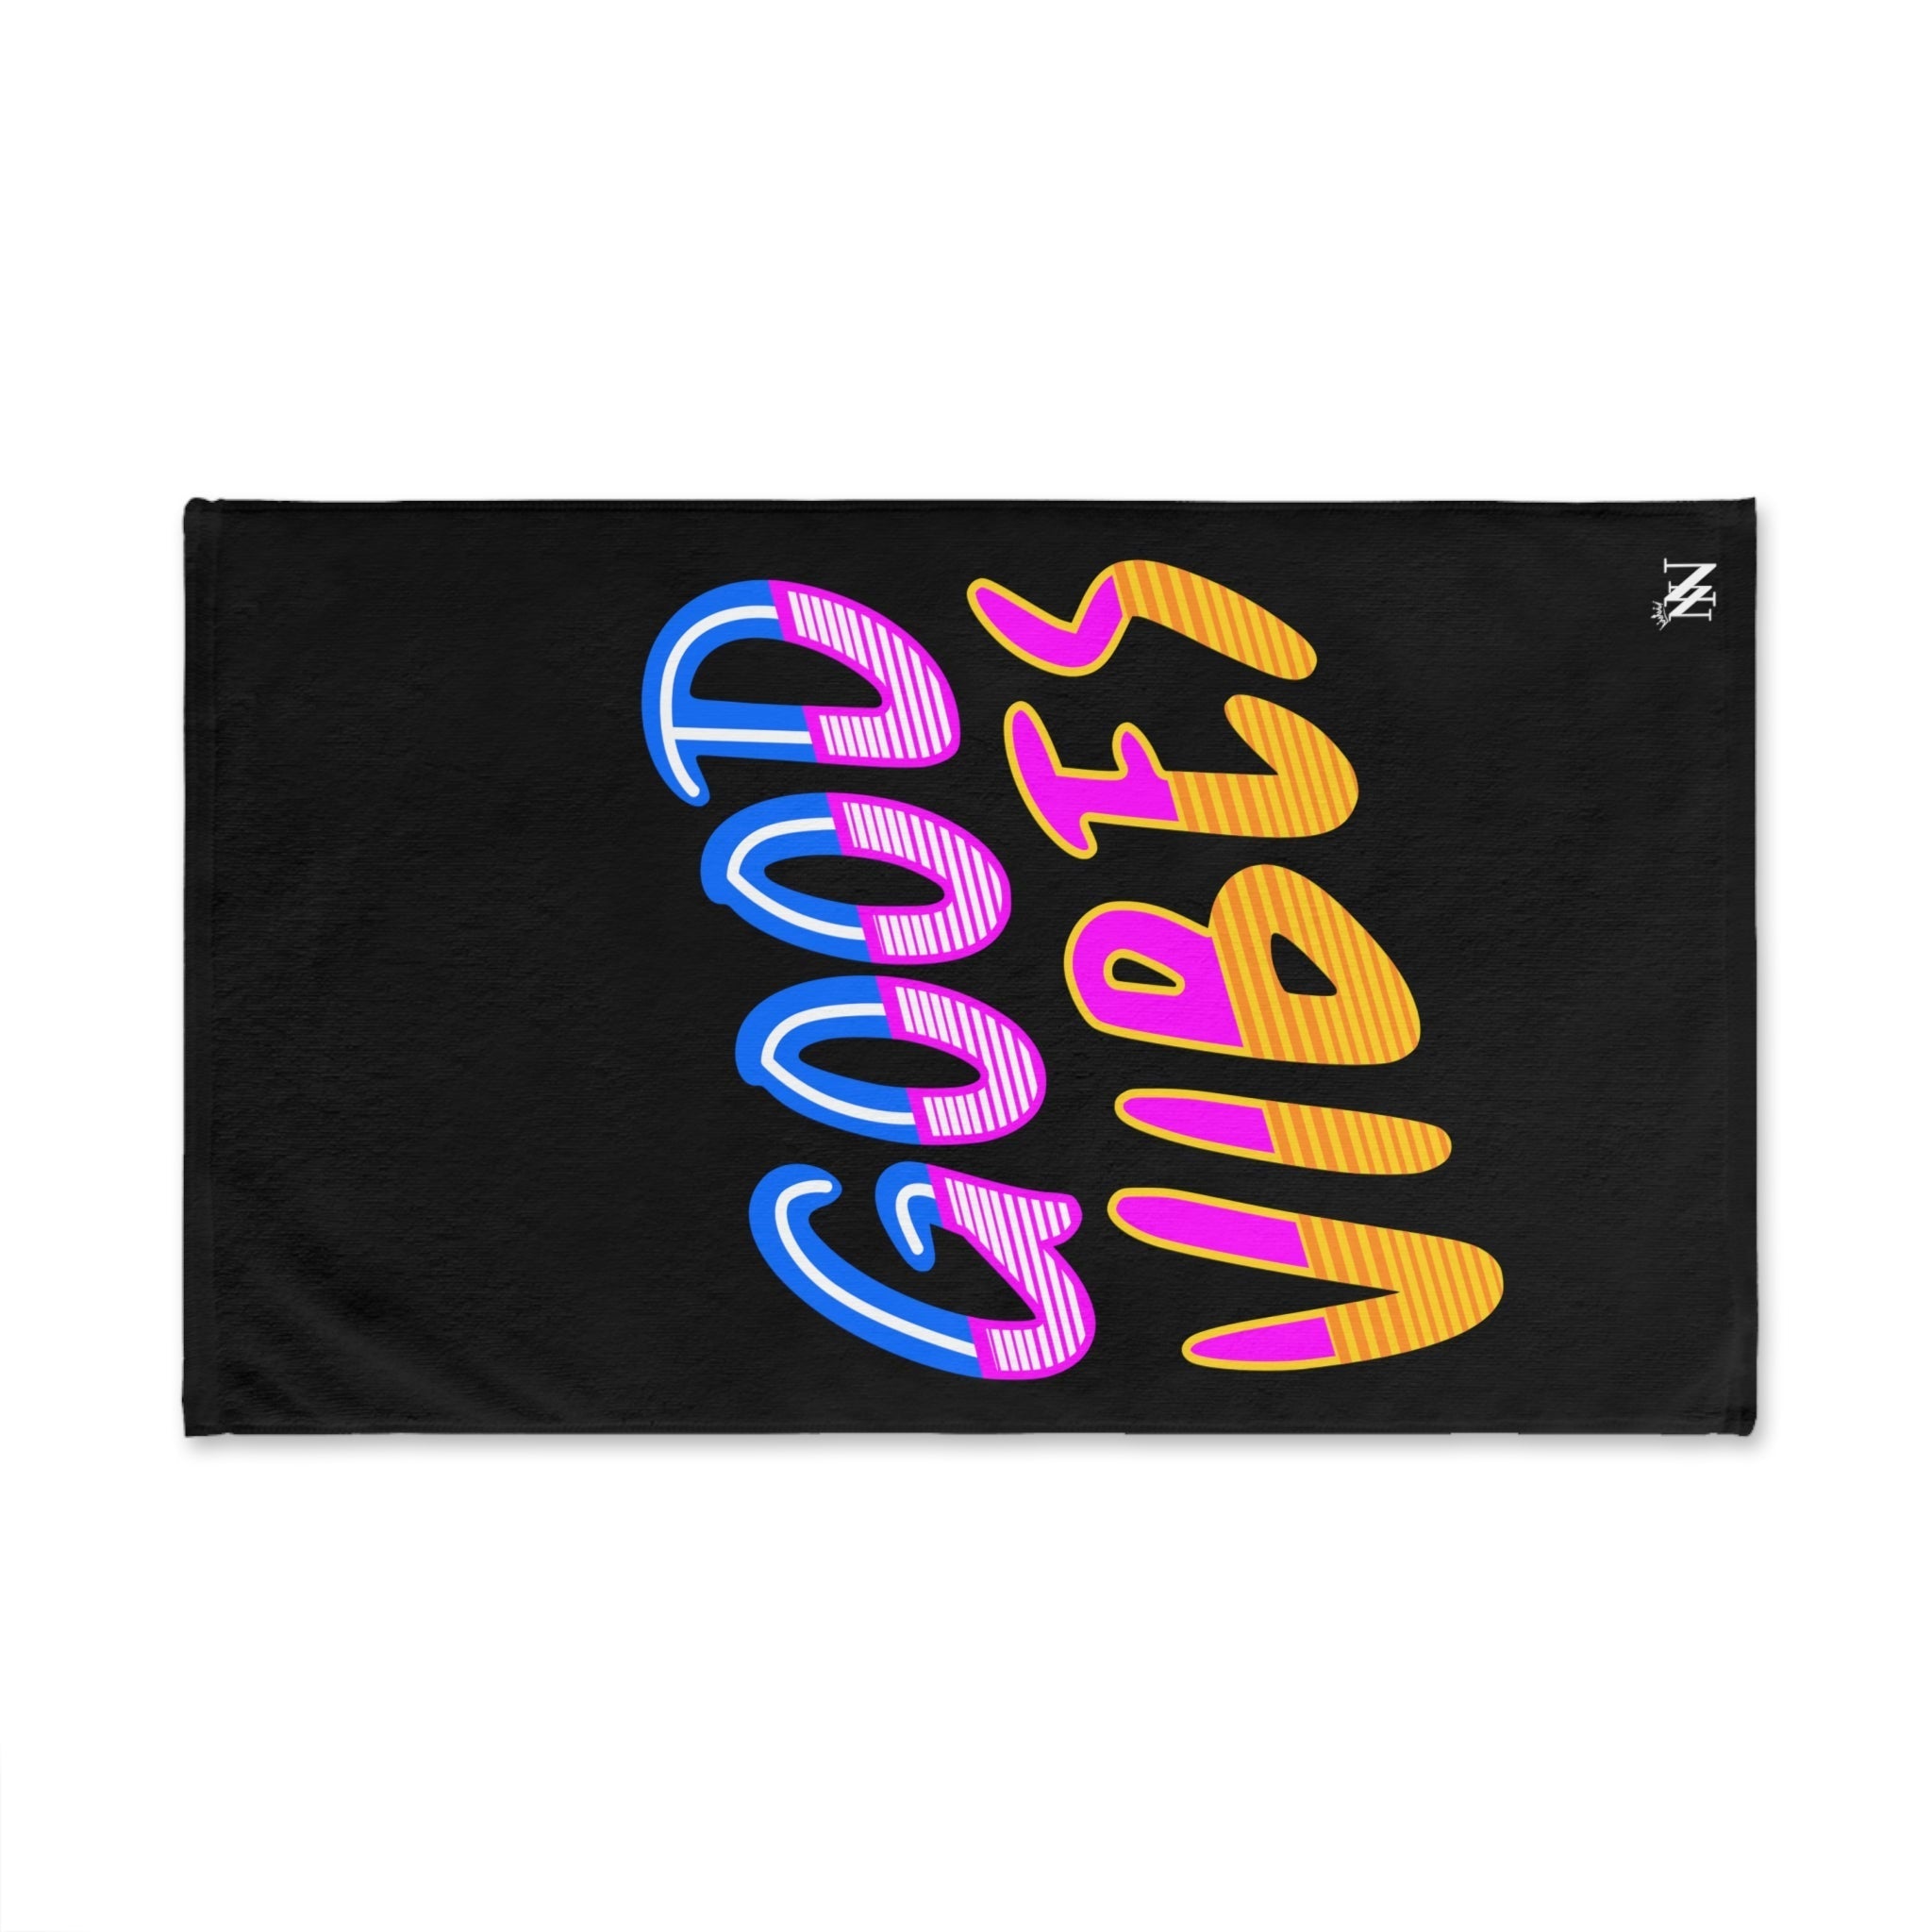 Neon Rainbow VibesBlack | Sexy Gifts for Boyfriend, Funny Towel Romantic Gift for Wedding Couple Fiance First Year 2nd Anniversary Valentines, Party Gag Gifts, Joke Humor Cloth for Husband Men BF NECTAR NAPKINS